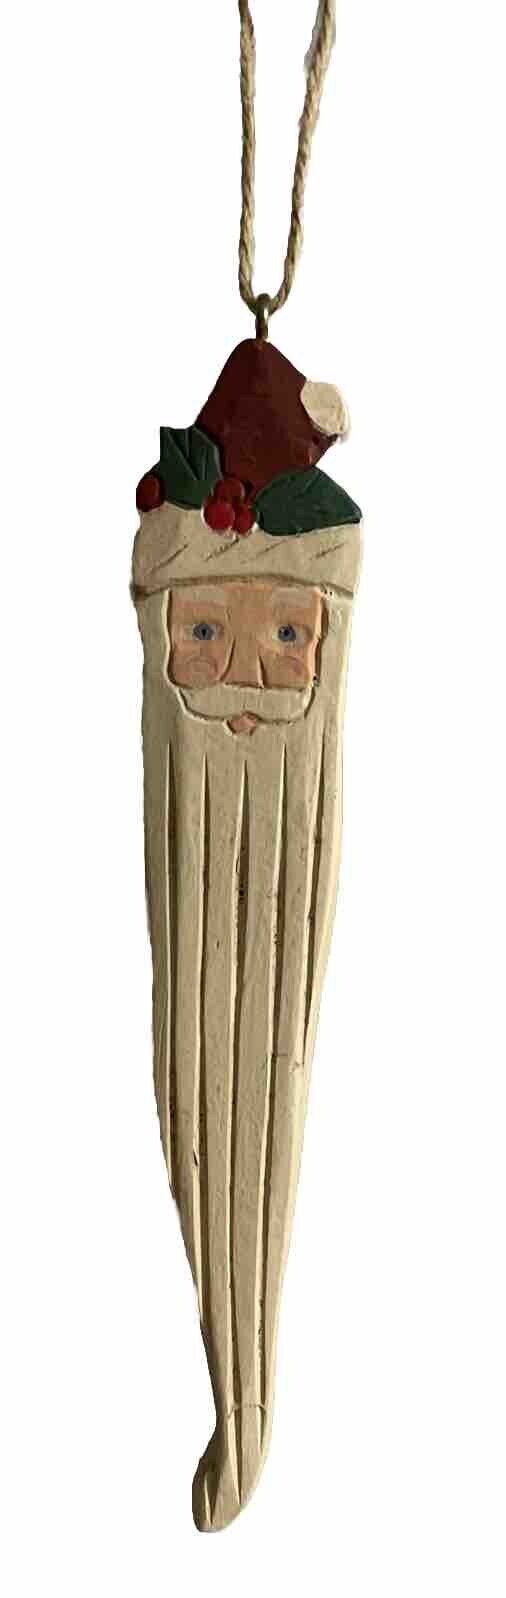 Hand Carved Ornament Wooden Santa Face Hand Painted Rustic Folk Art Hanging